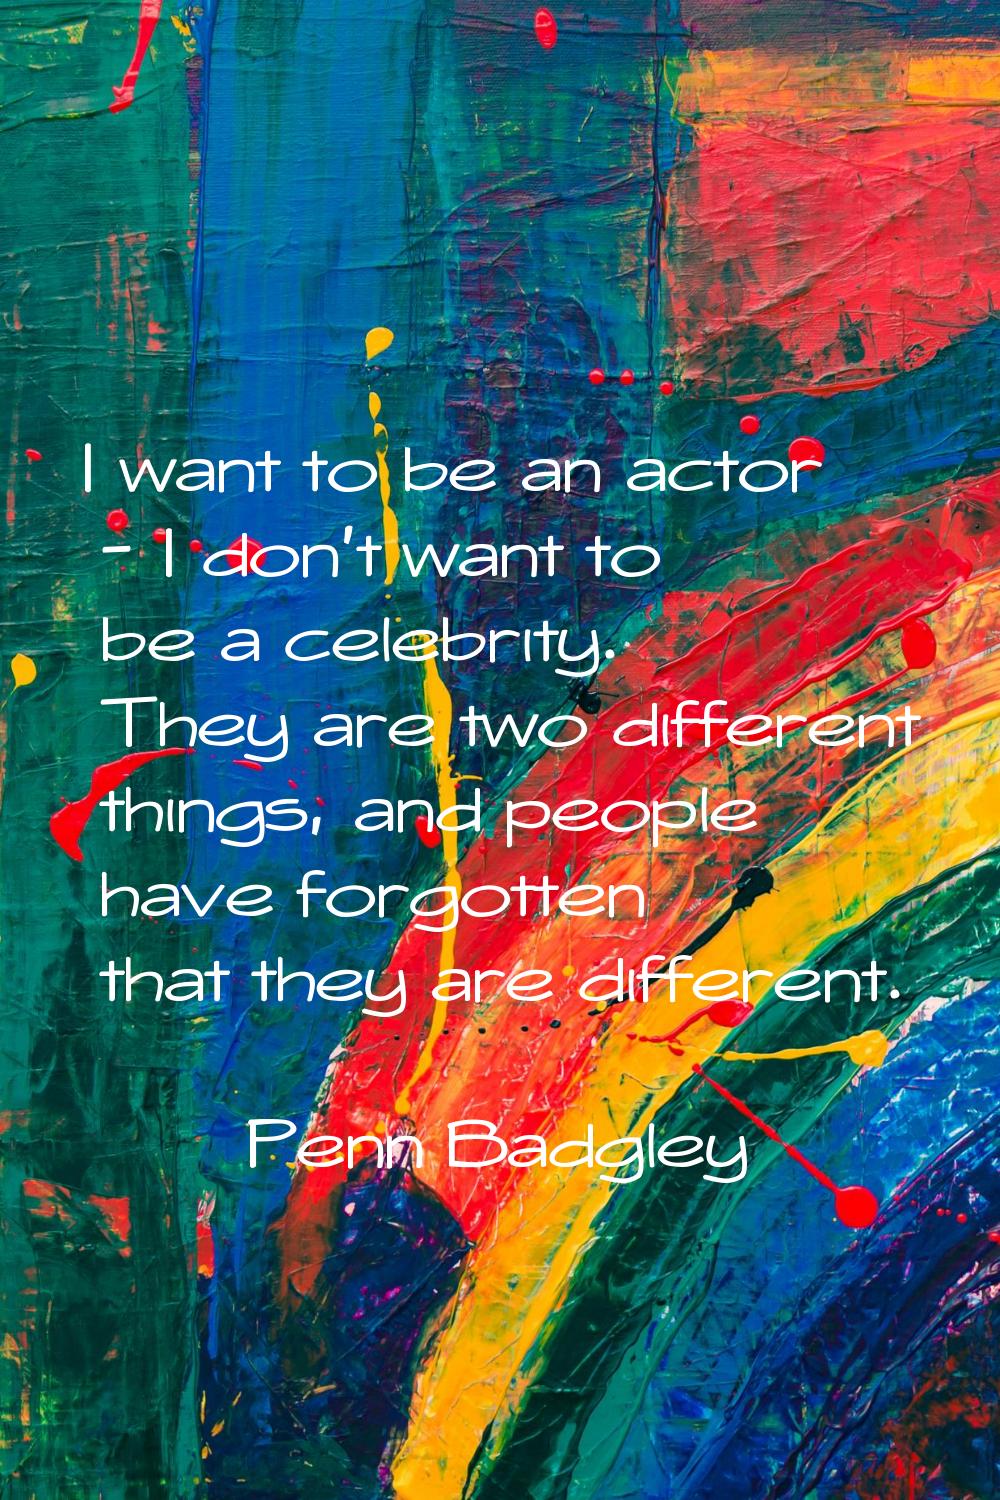 I want to be an actor - I don't want to be a celebrity. They are two different things, and people h